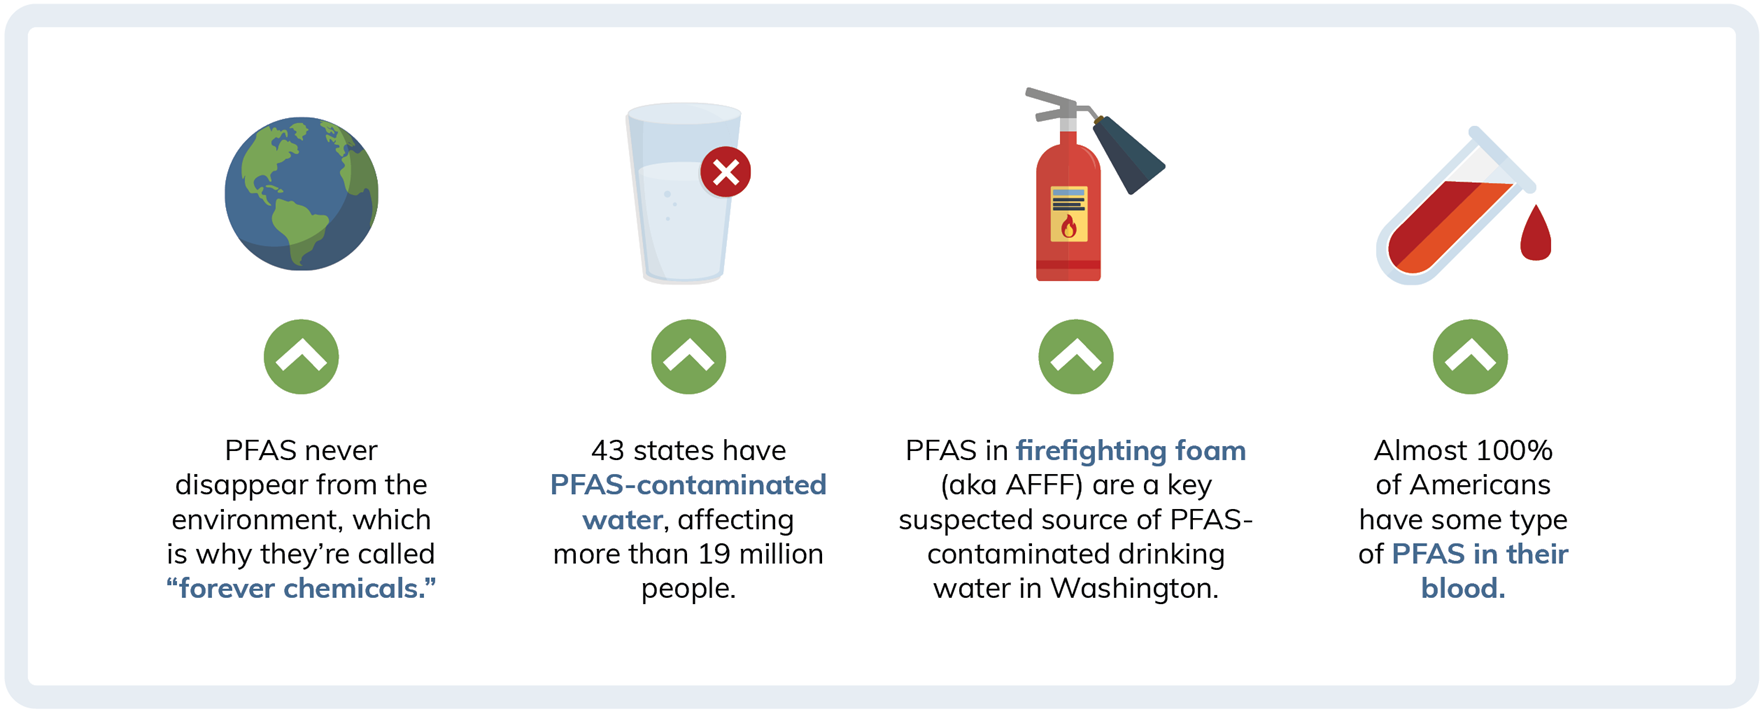 PFAS are “forever chemicals” that contaminate drinking water and are found in the blood of nearly every American.